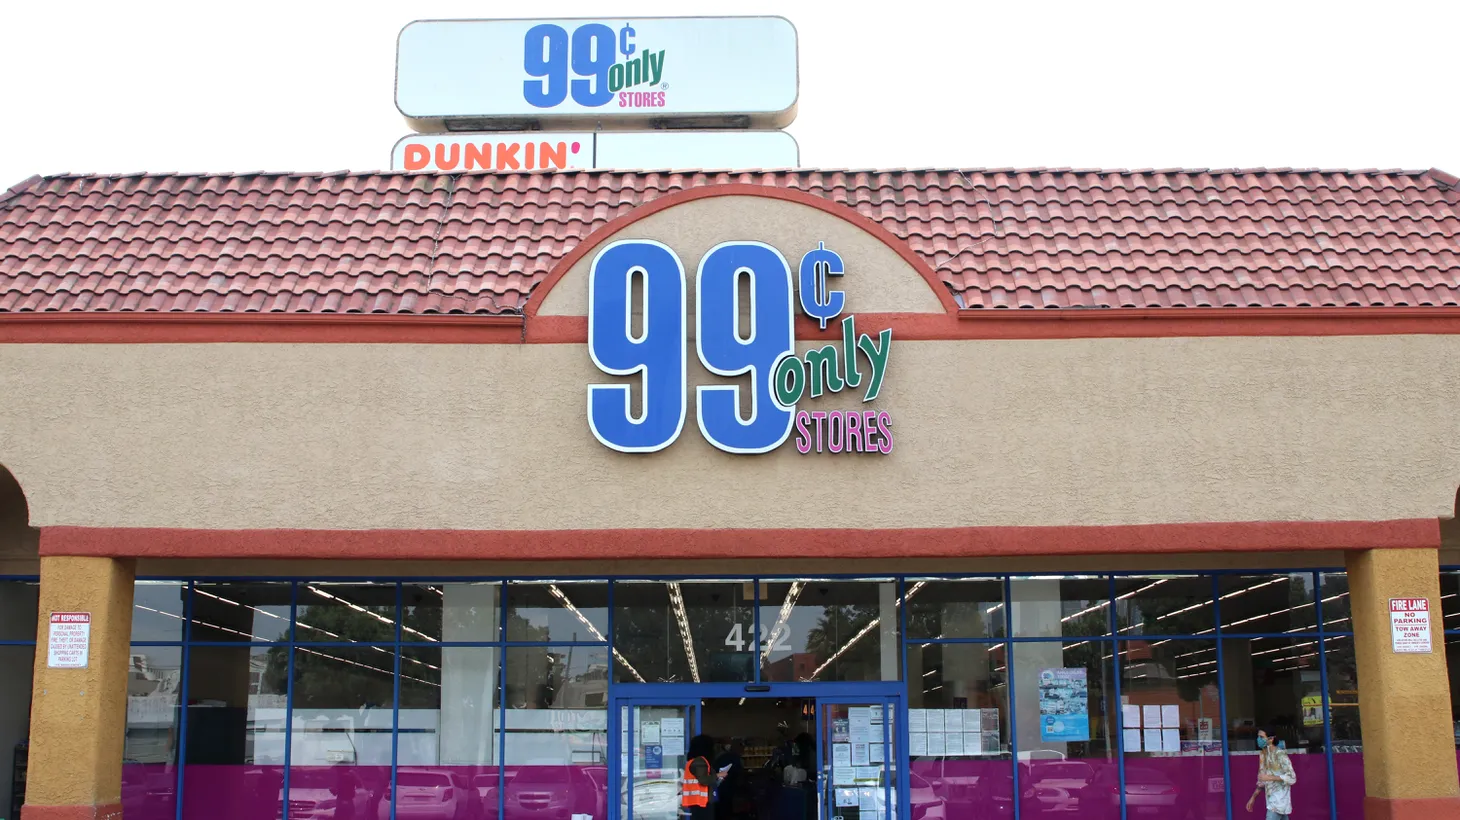 “That's the place where your friends who are trying to find crazy discounts go. That's where working-class folks go. That's where retirees go,” Gustavo Arellano says of 99 Cents Only stores.